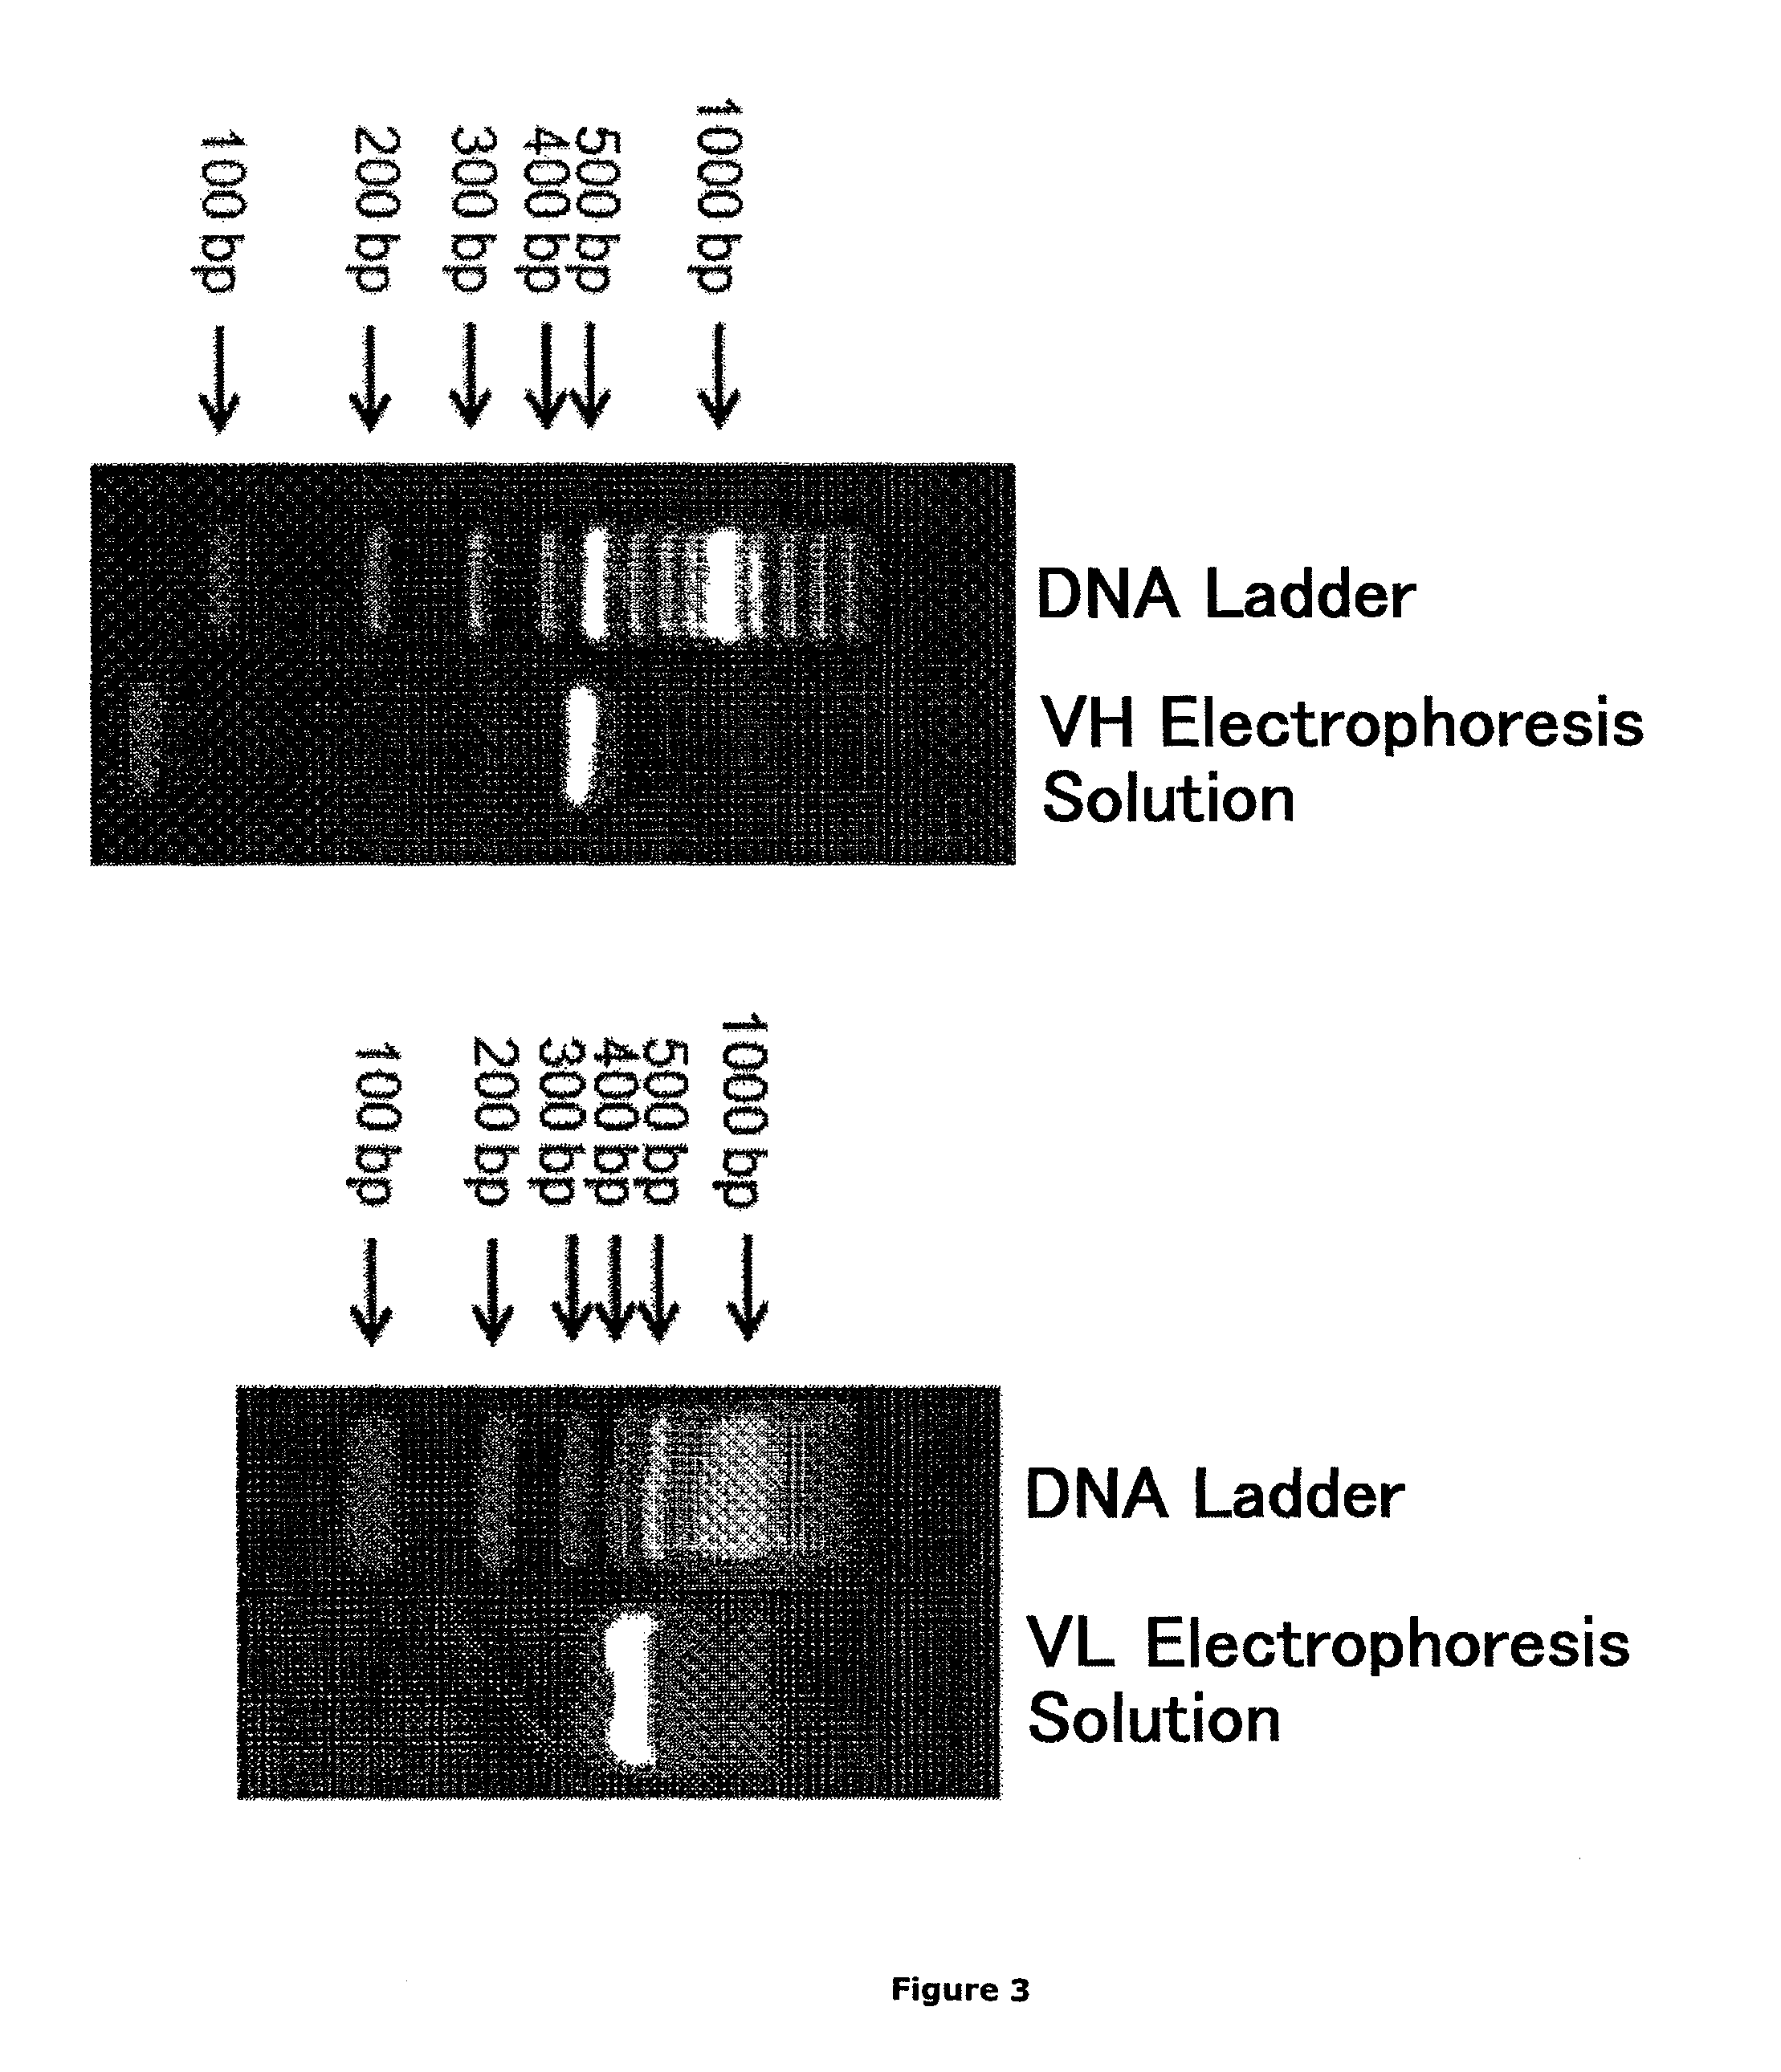 Monoclonal antibody against slightly oxidized low-density lipoprotein and hybridoma for producing the same